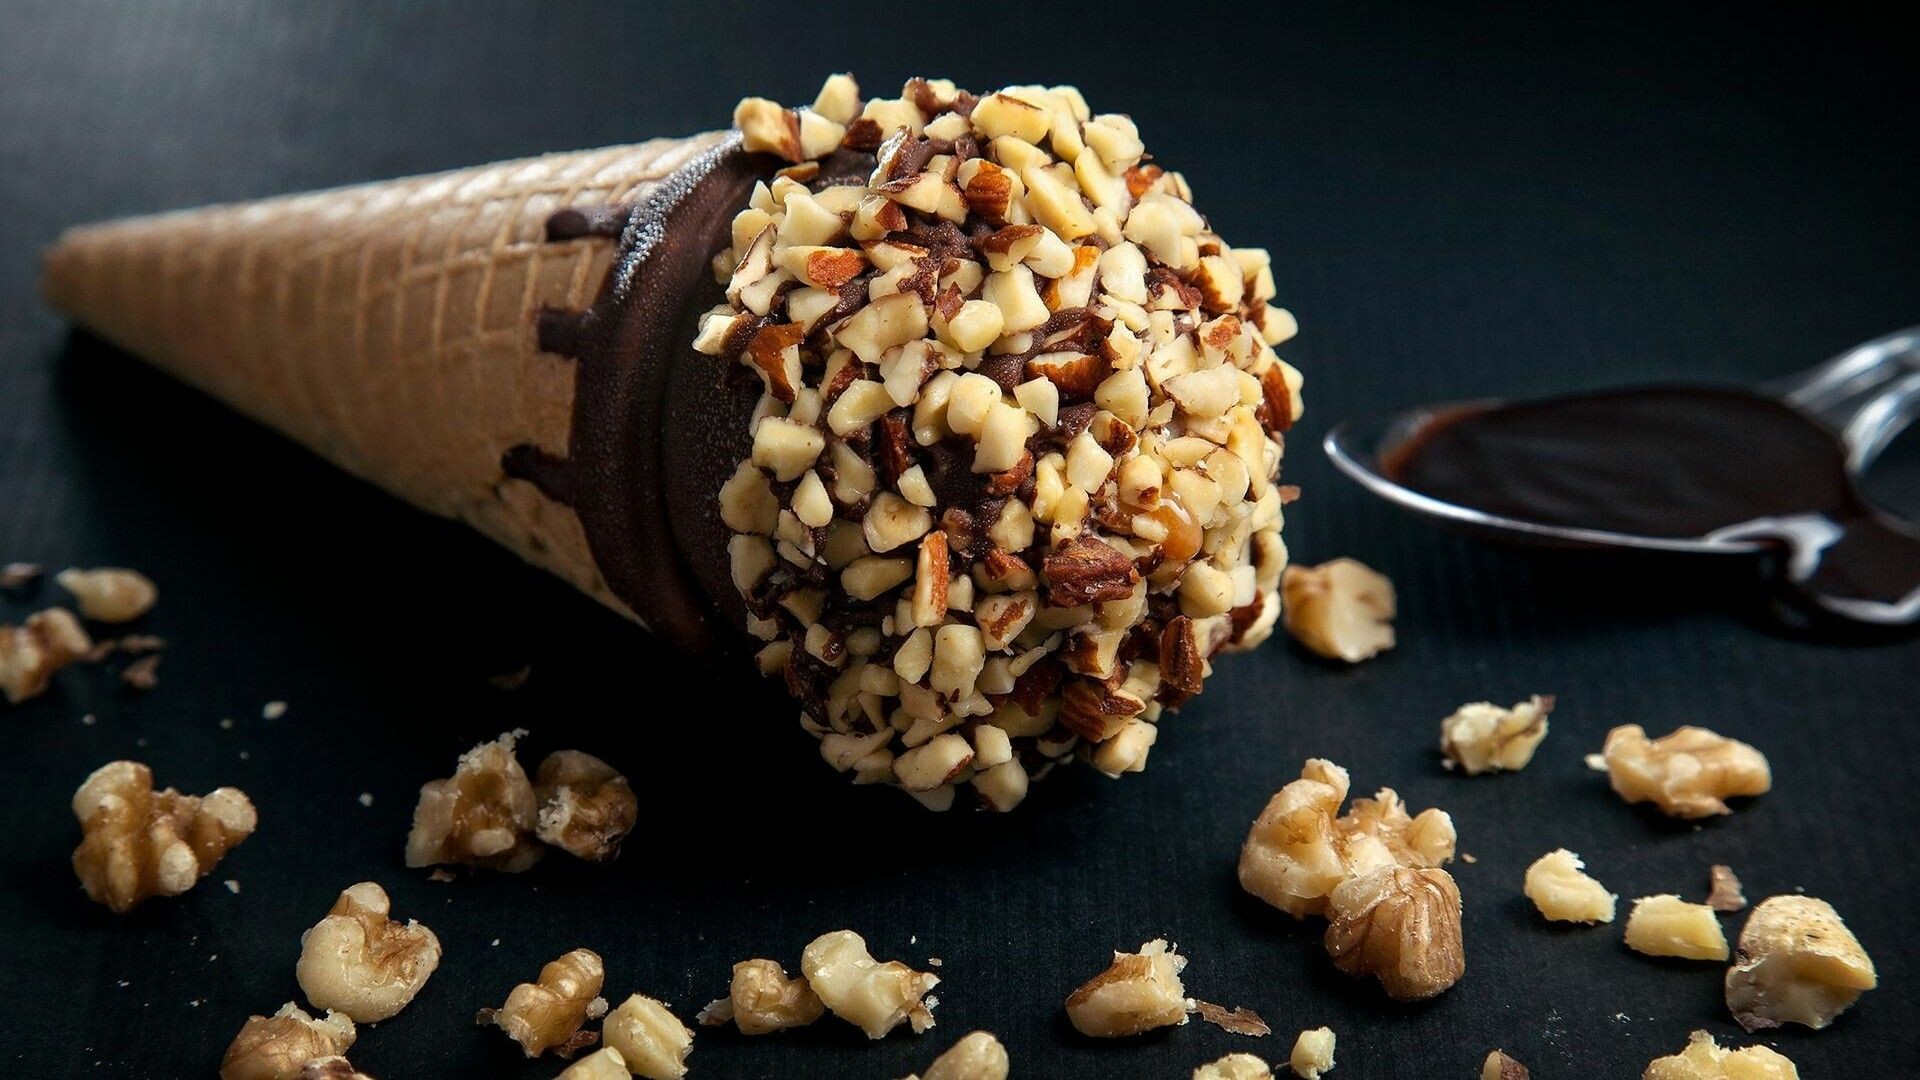 Ice Cream: A sweet snack or a dessert made from dairy products, Peanuts. 1920x1080 Full HD Wallpaper.